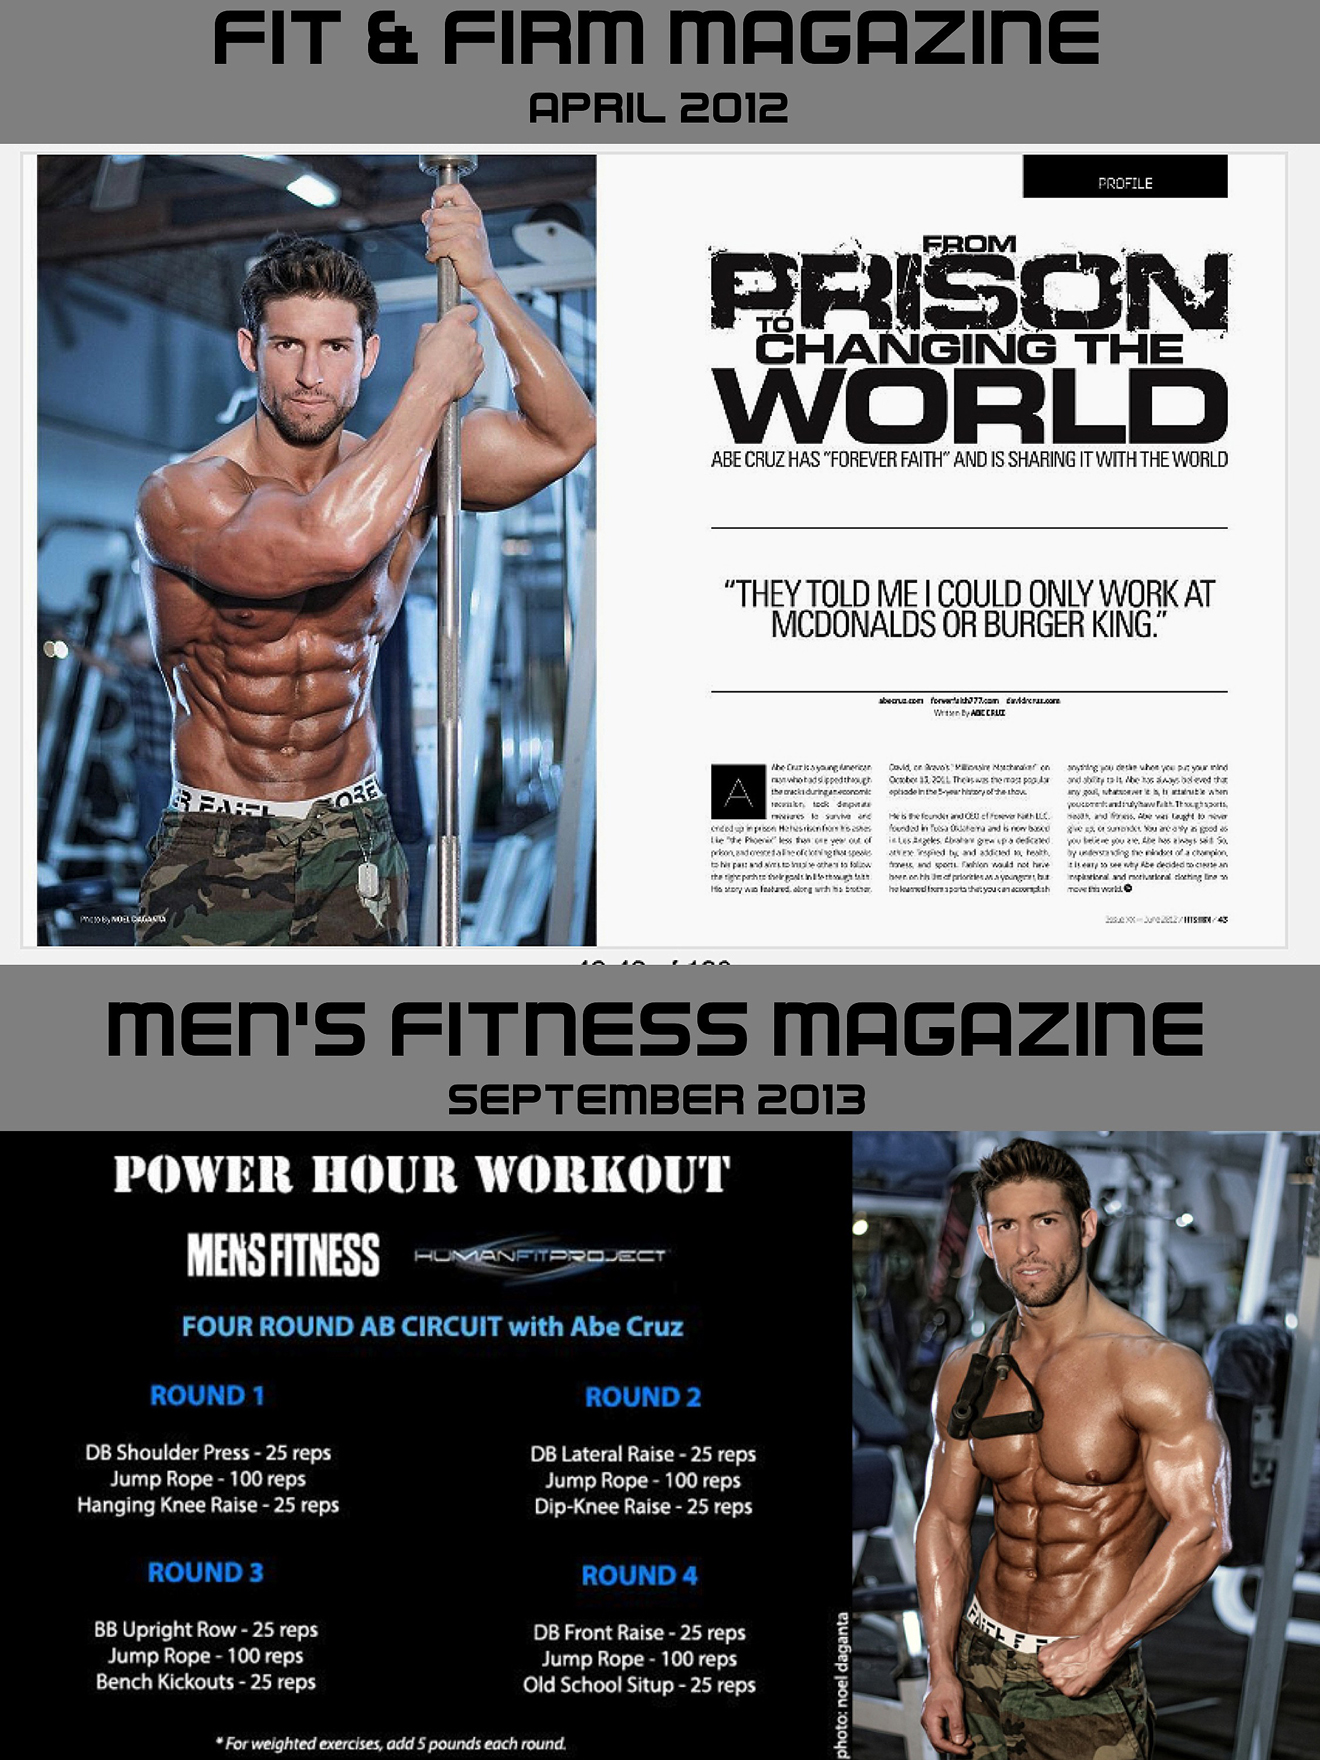 Abe Cruz in Men's Fitness and Fit & Firm magazines